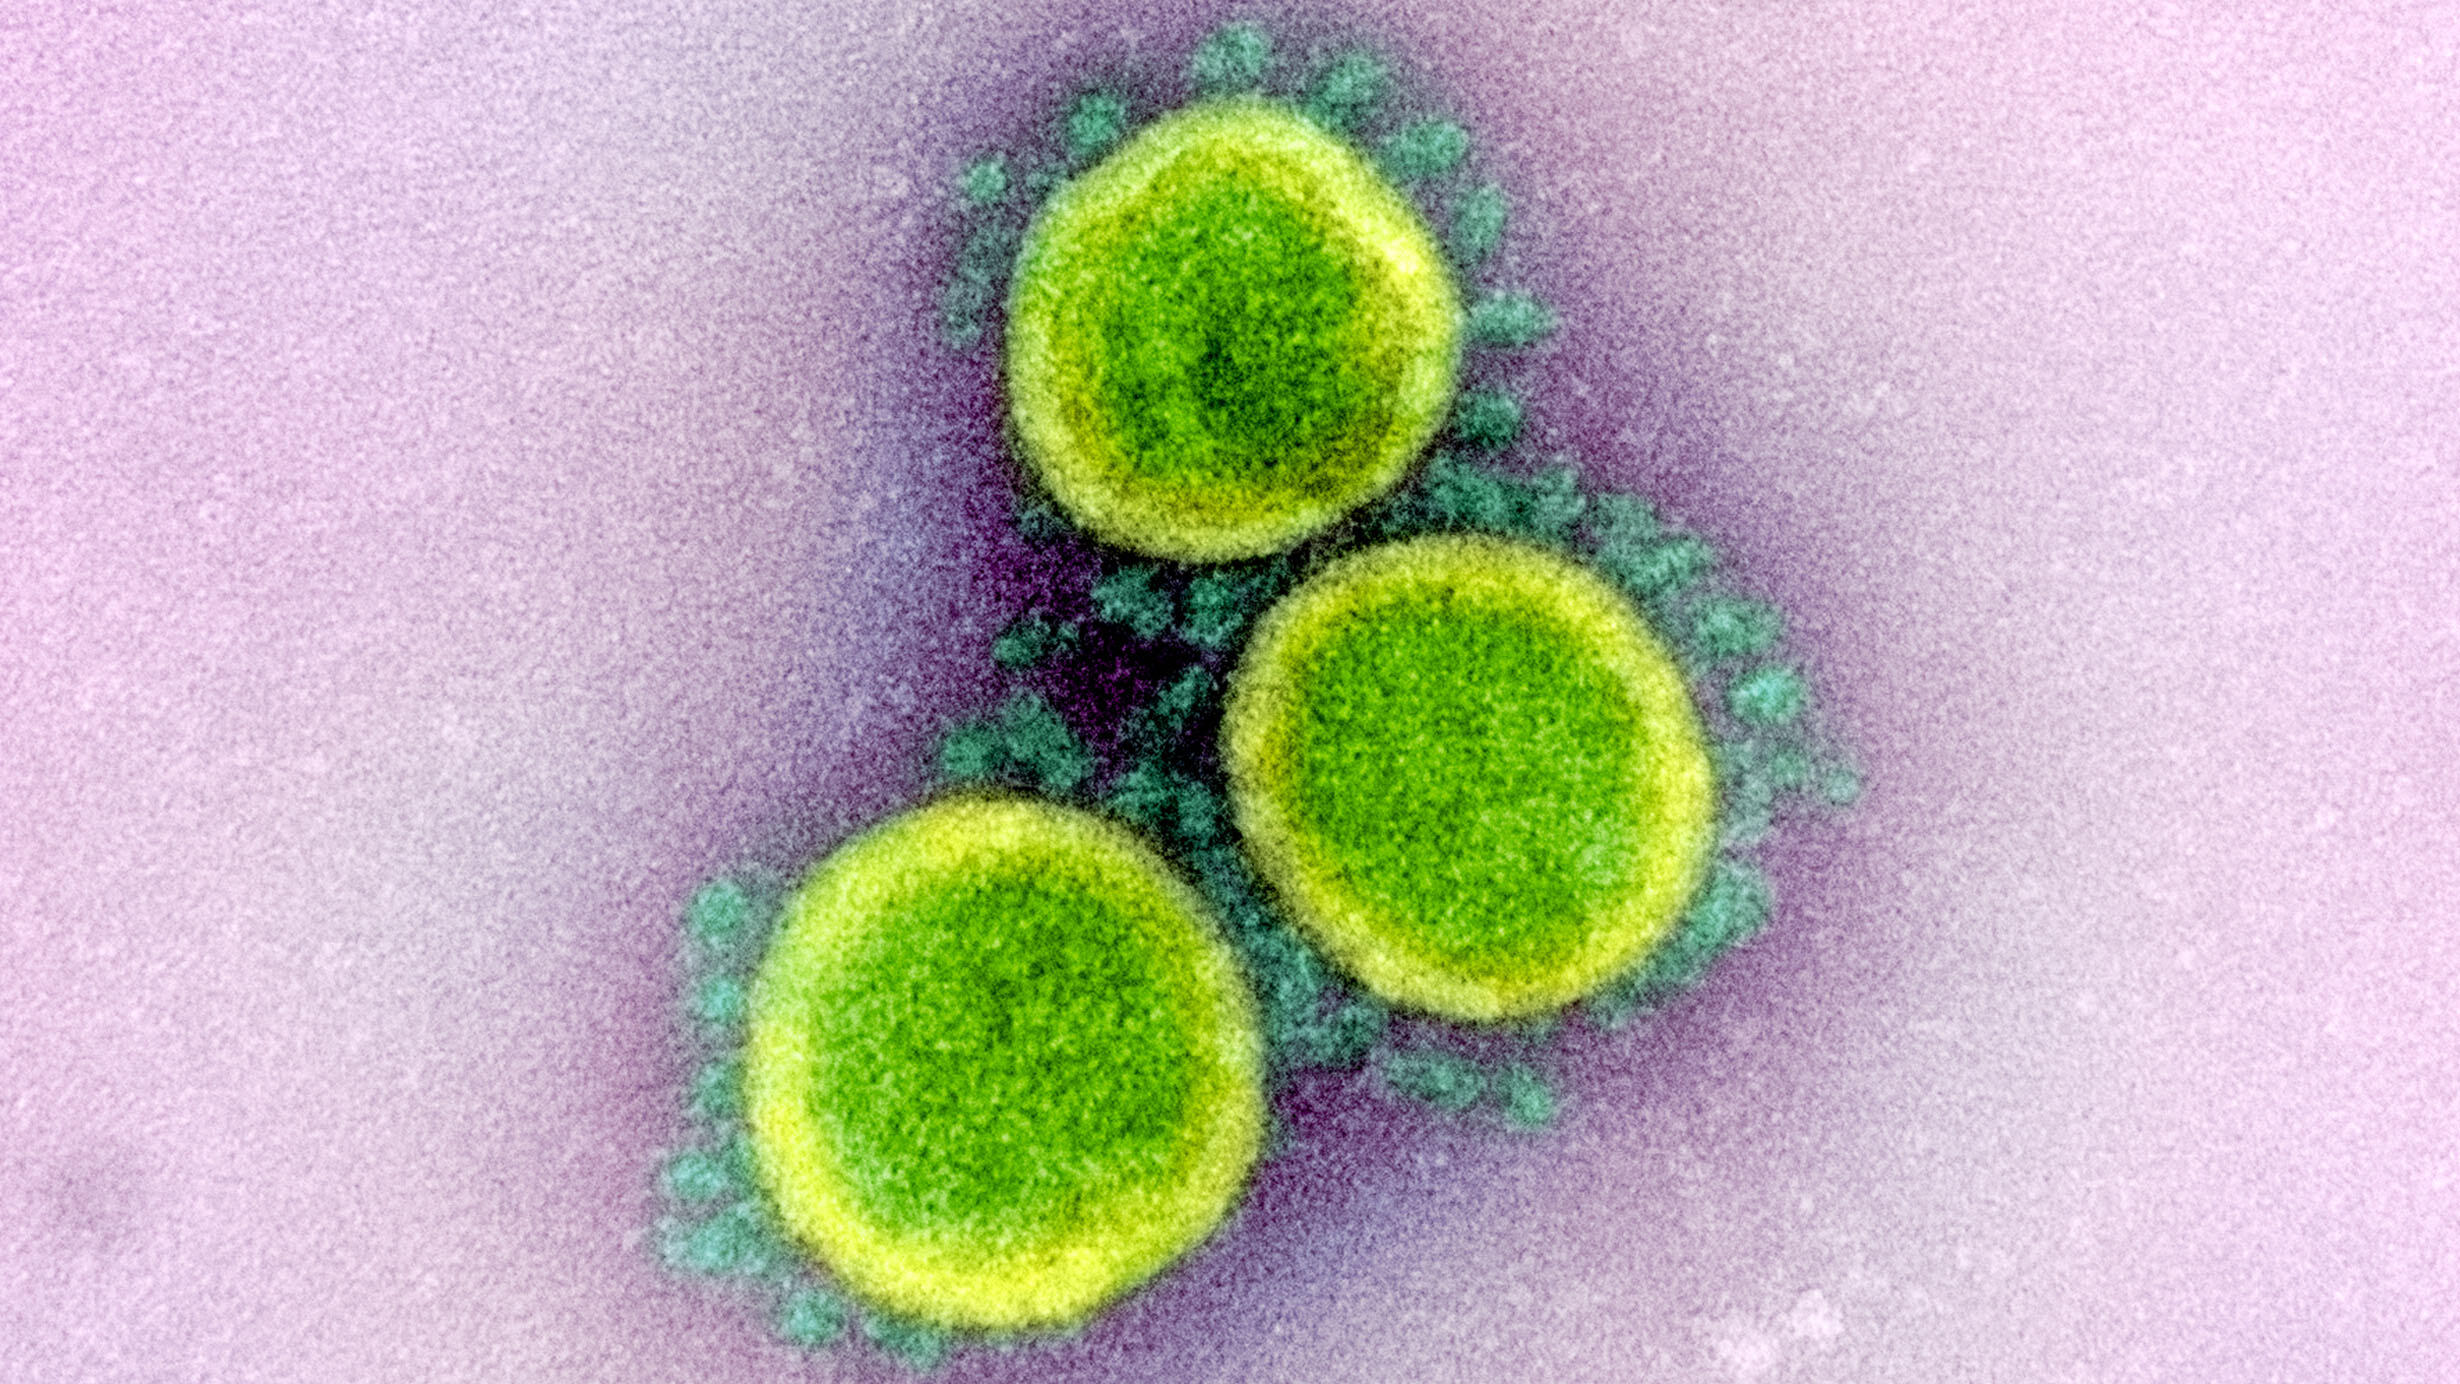 Color-enhanced image of SARS-CoV-2 virus particles.